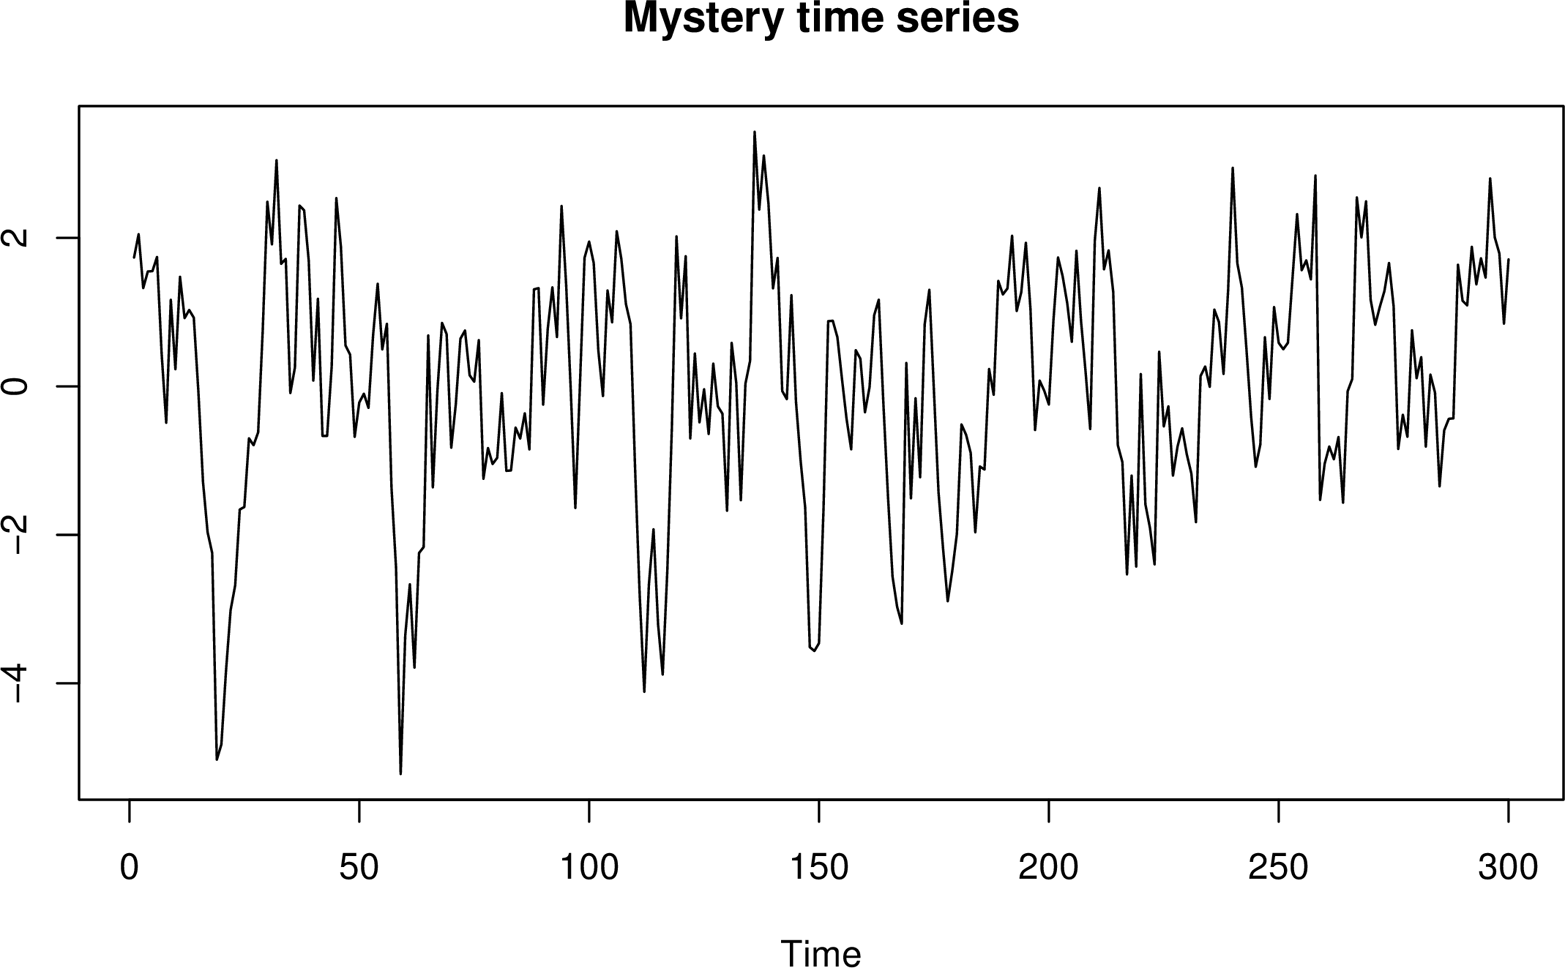 plots/output/statistical_inference/mystery_time_series.png